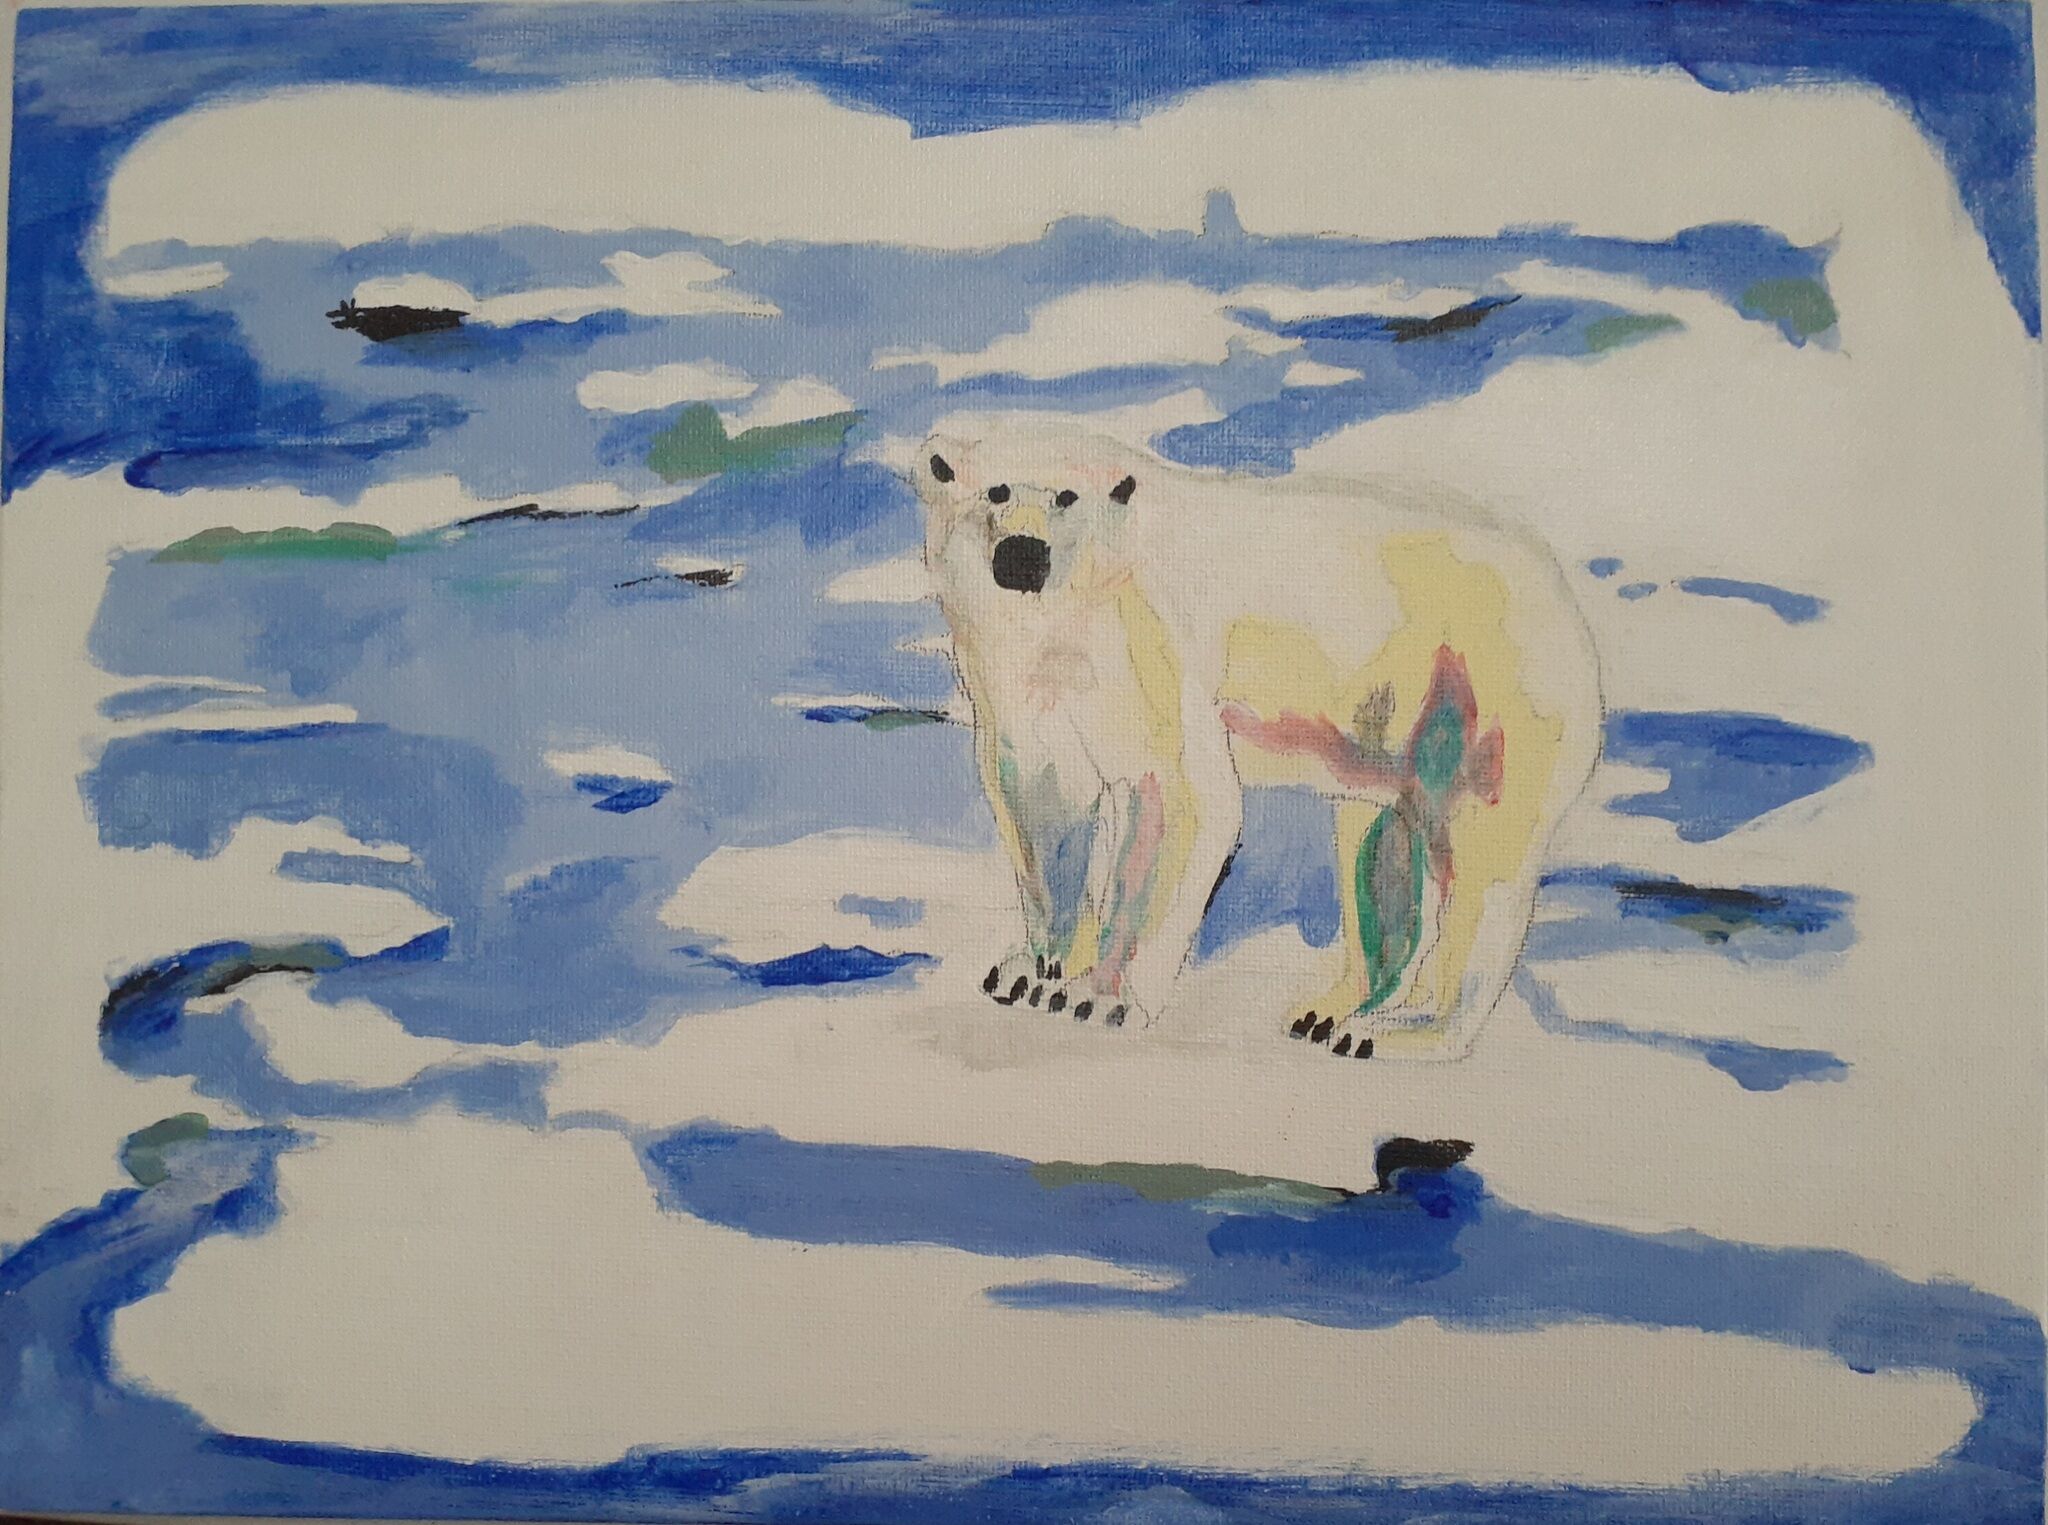 A painting of a polar bear standing on a melting ice platform.